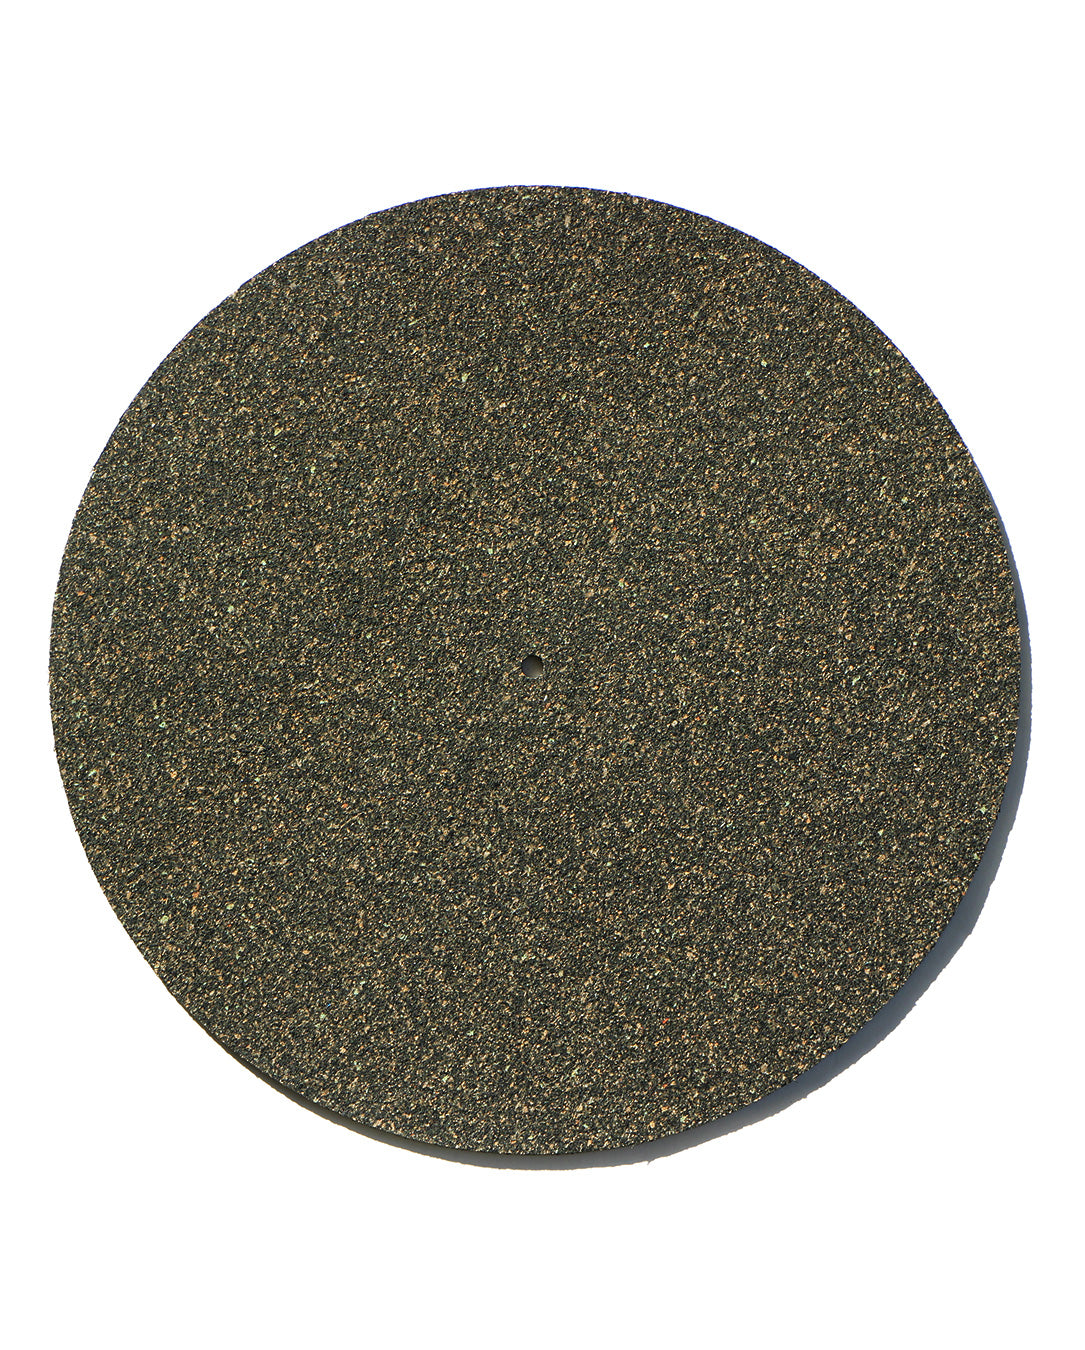 Rhythm Section Edition Audiophile Cork and Rubber Composite Slipmat